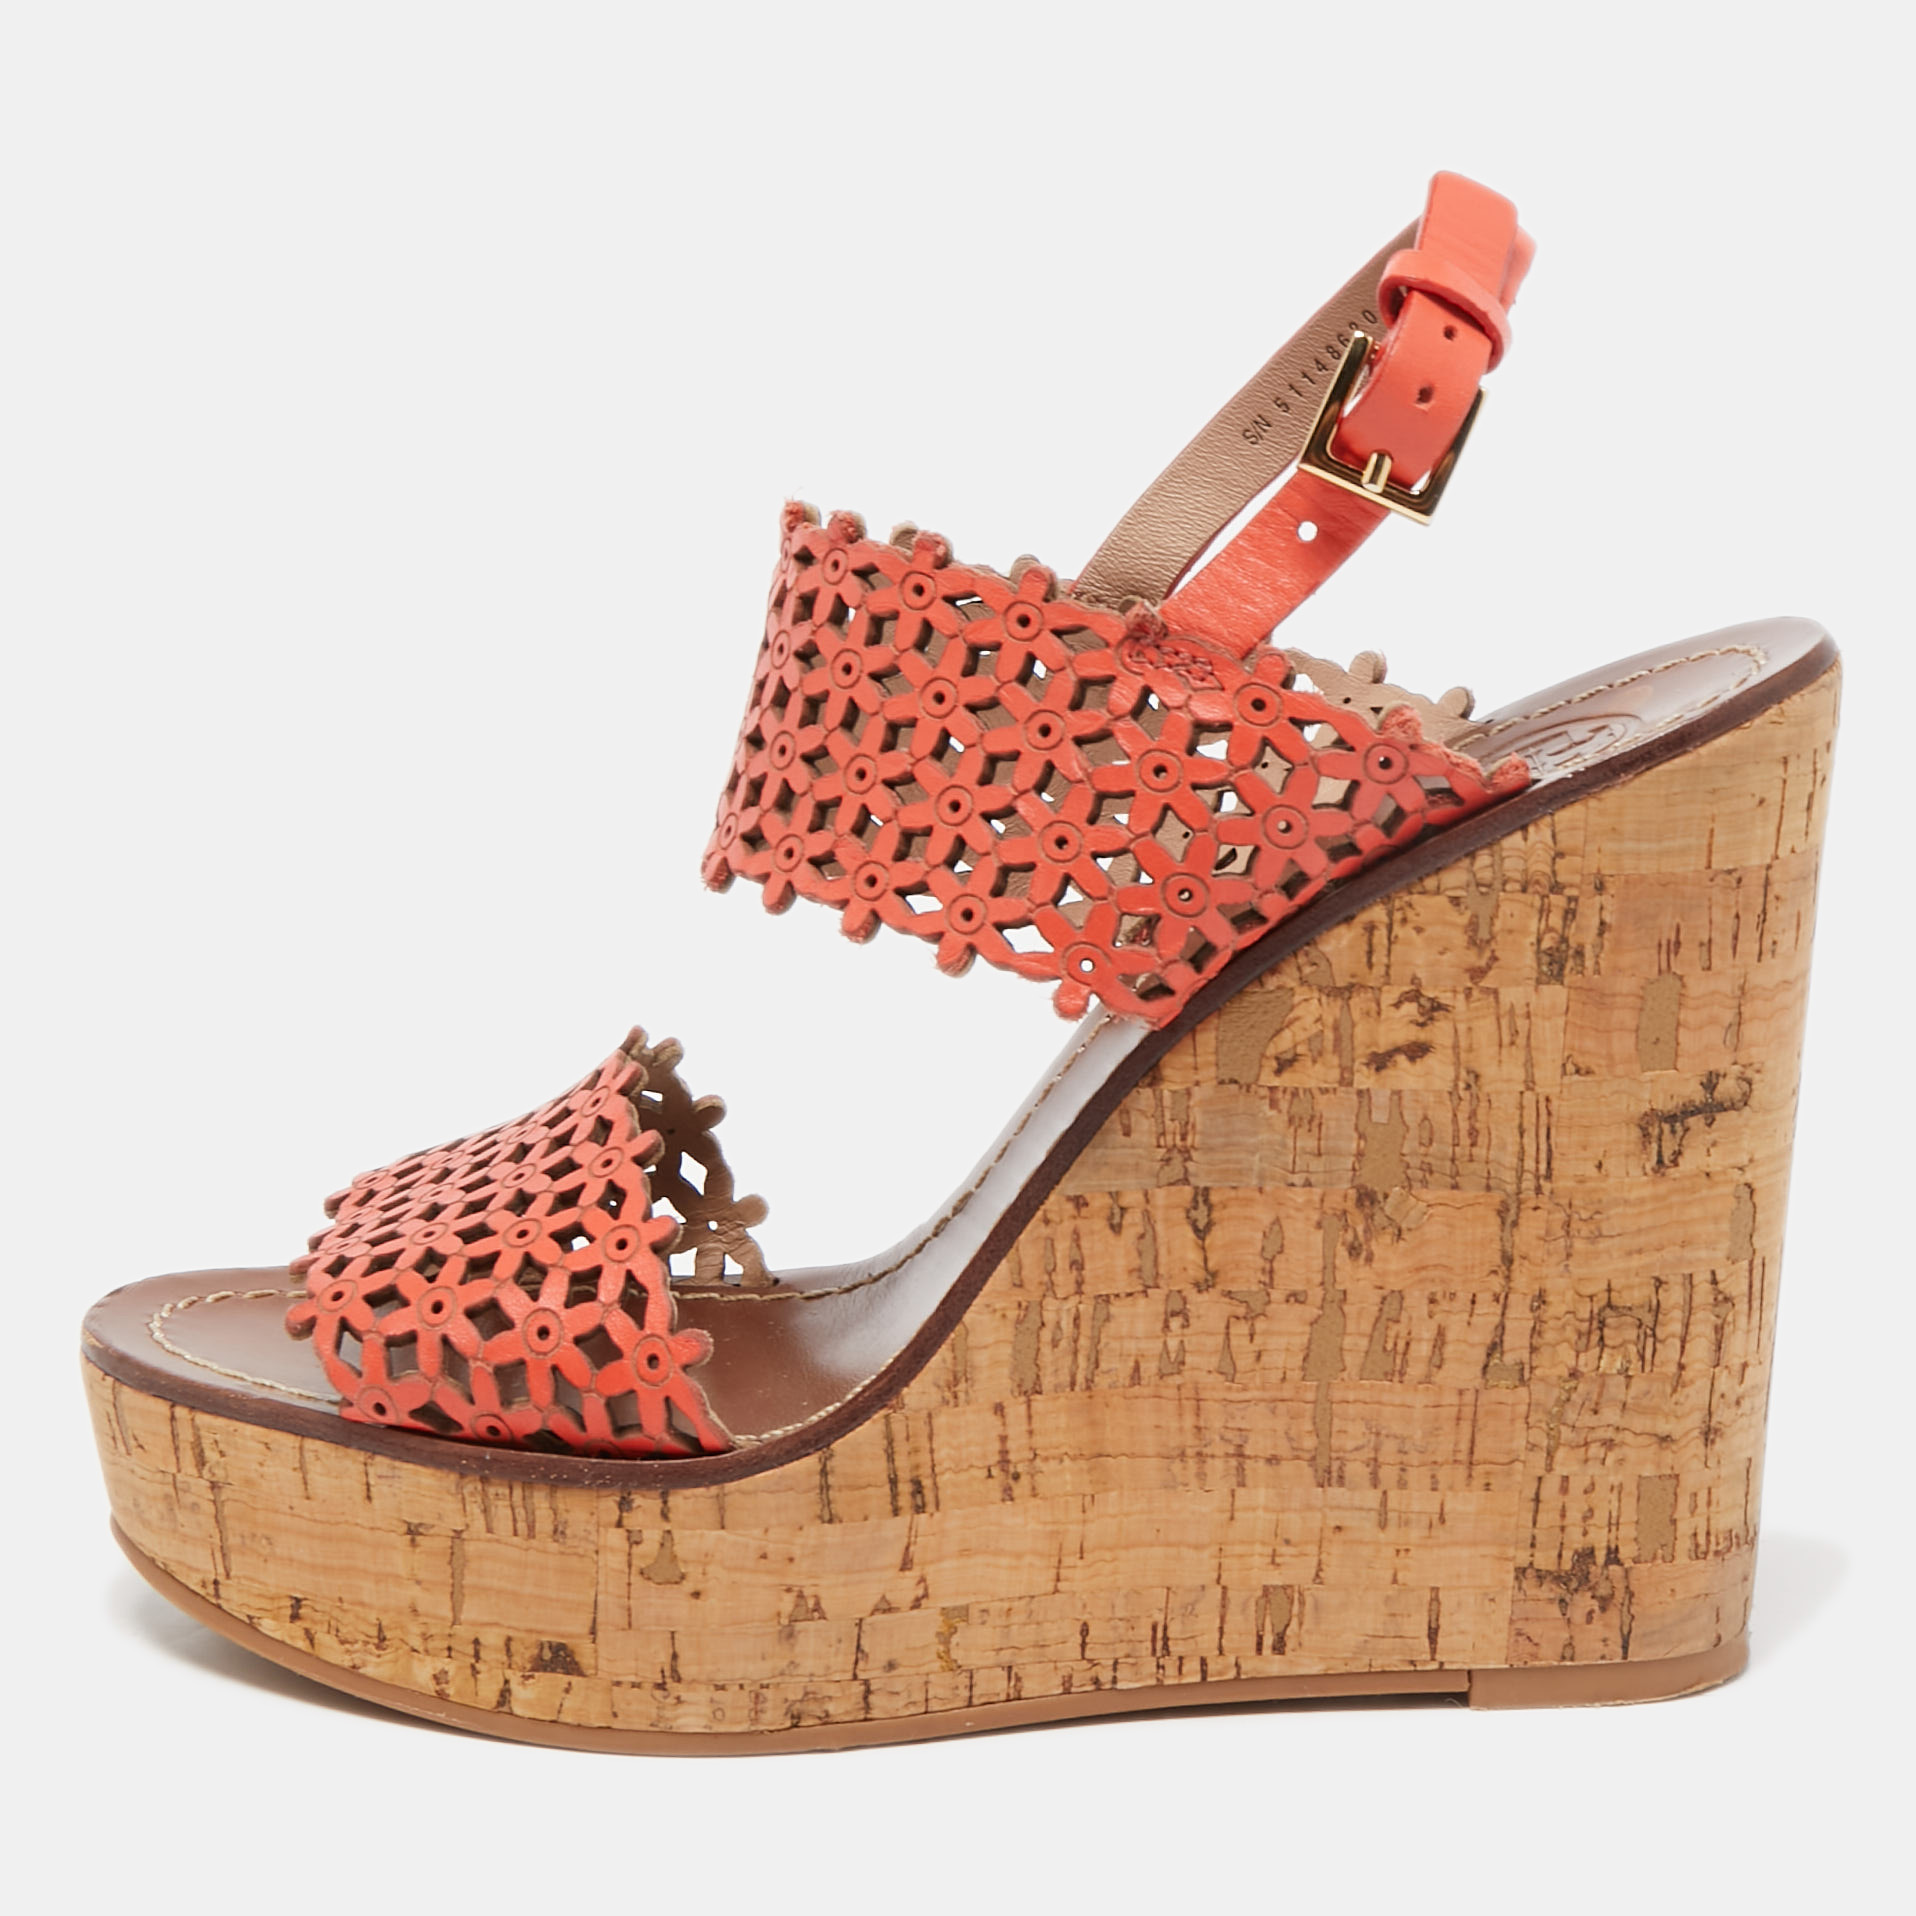 Pre-owned Tory Burch Orange Perforated Leather Daisy Cork Wedge Sandals Size 37